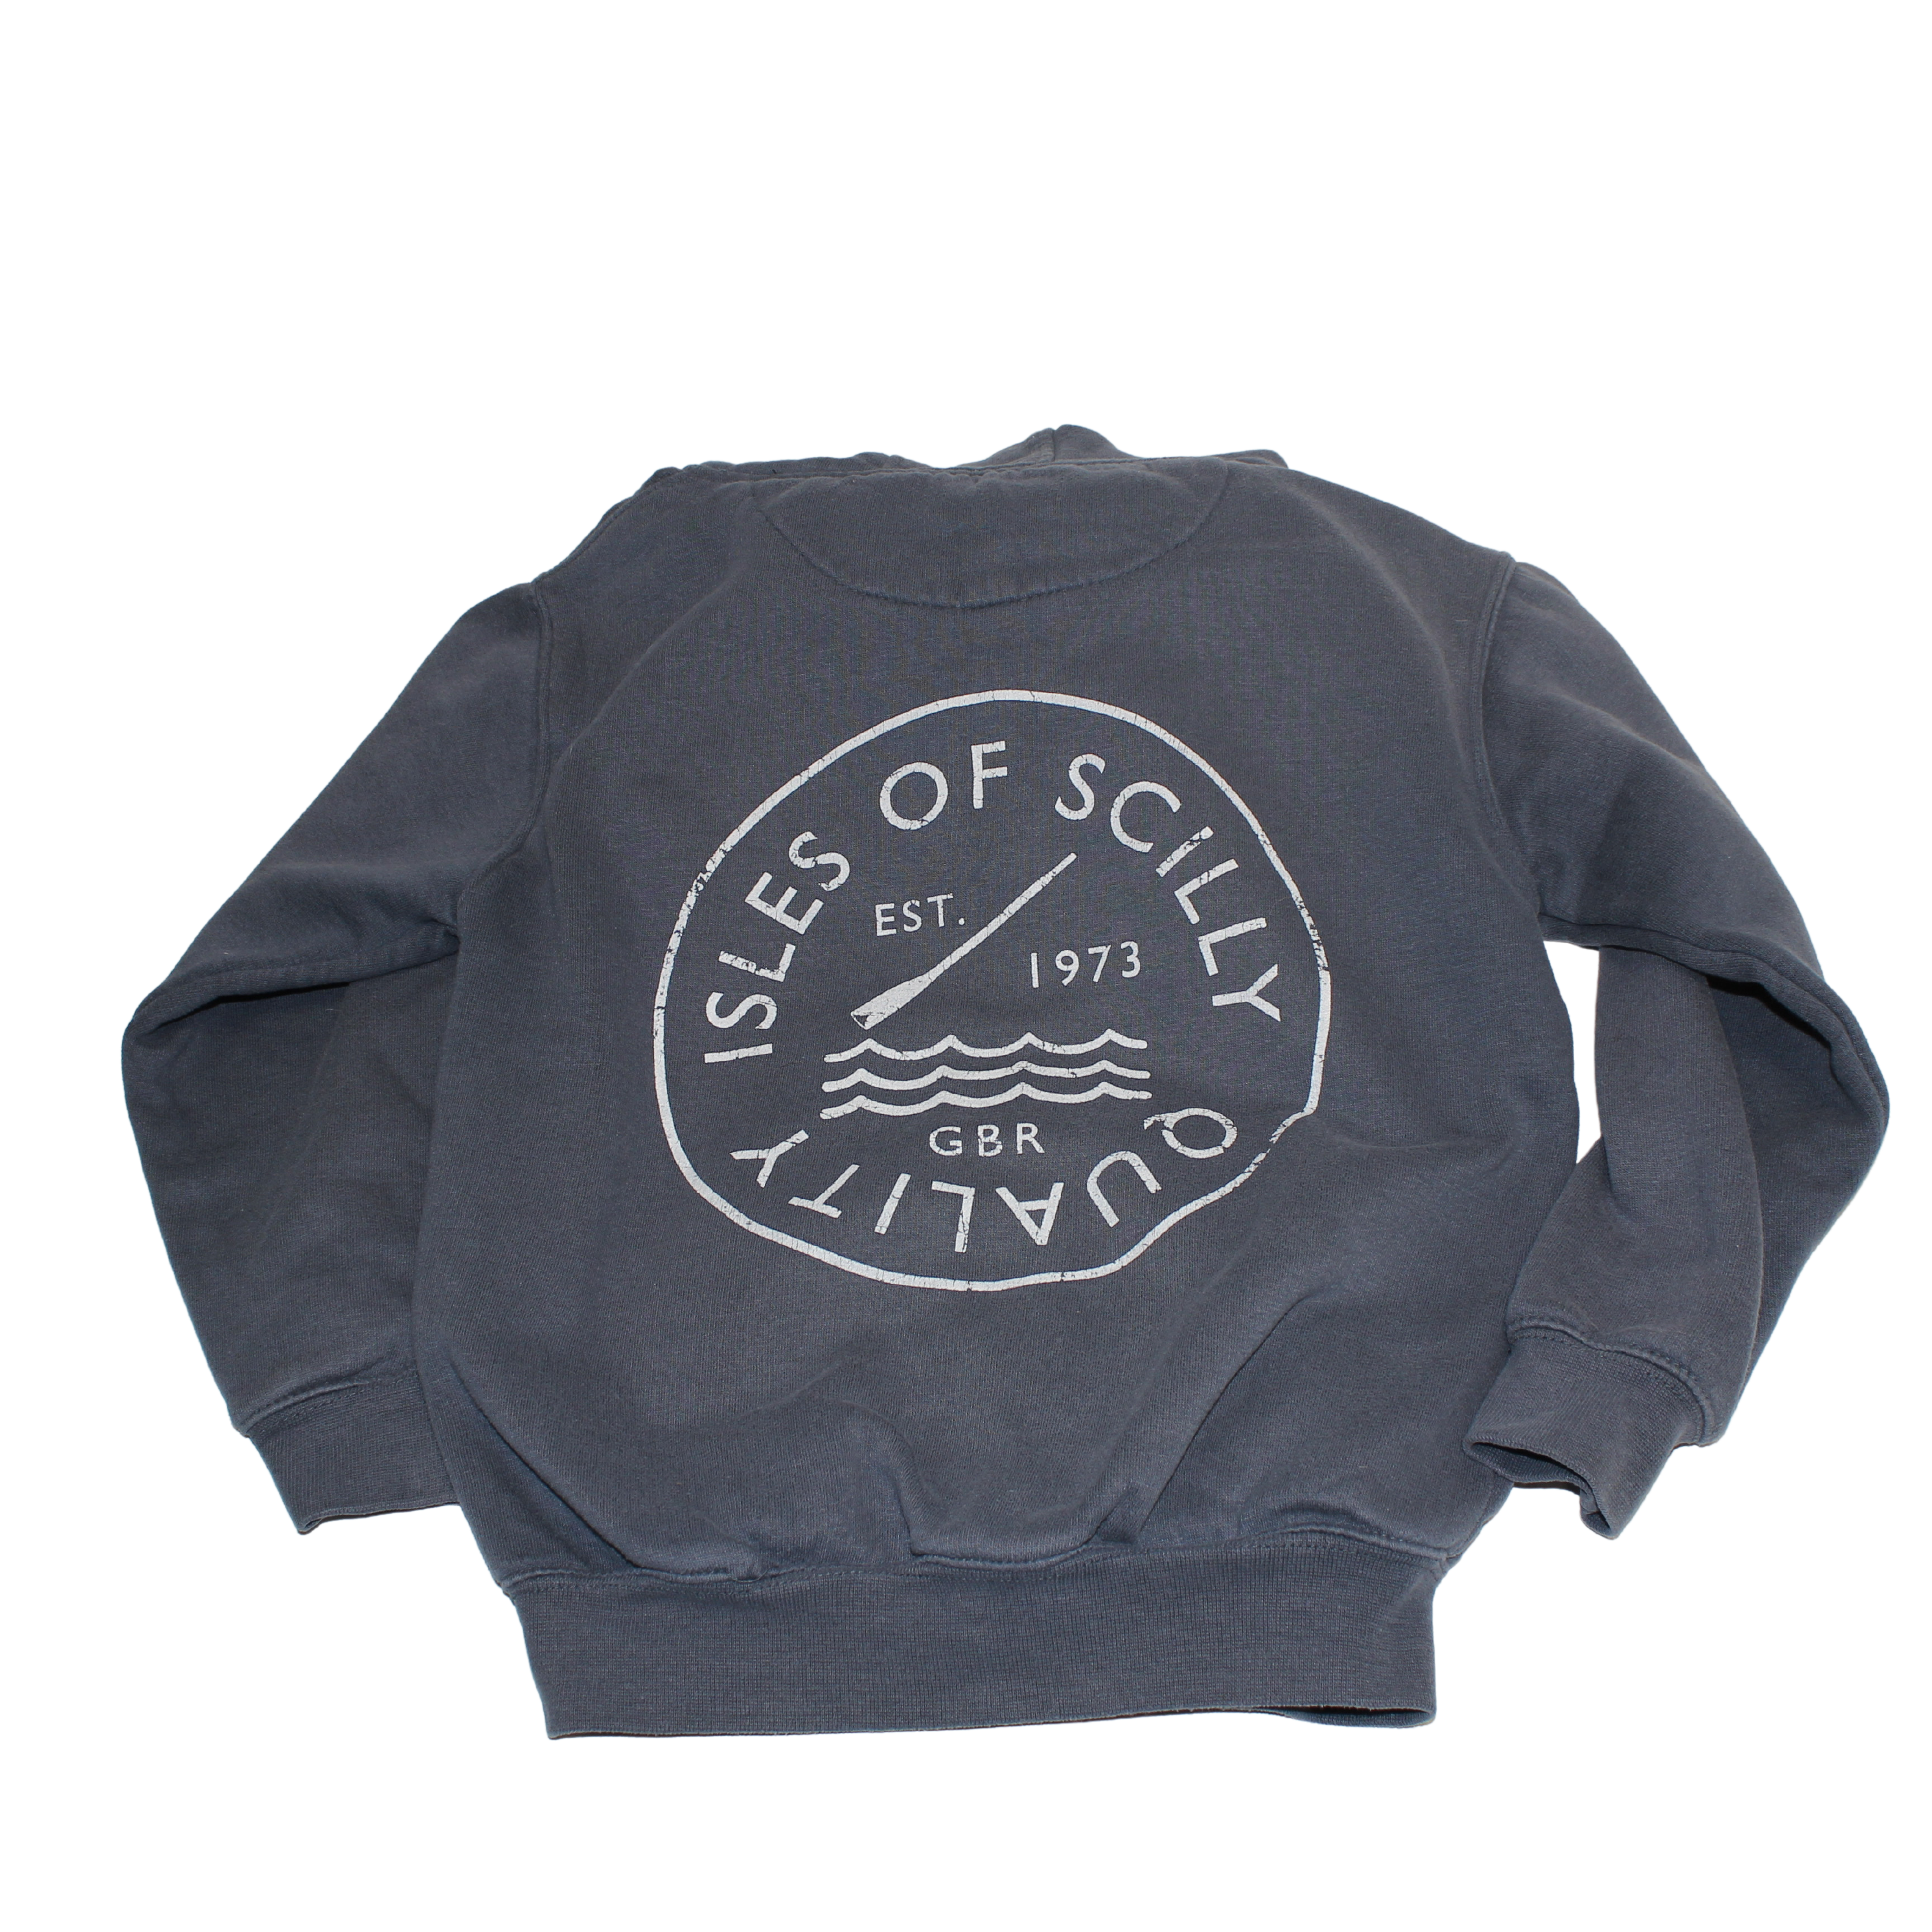 Isles of Scilly Zip Up